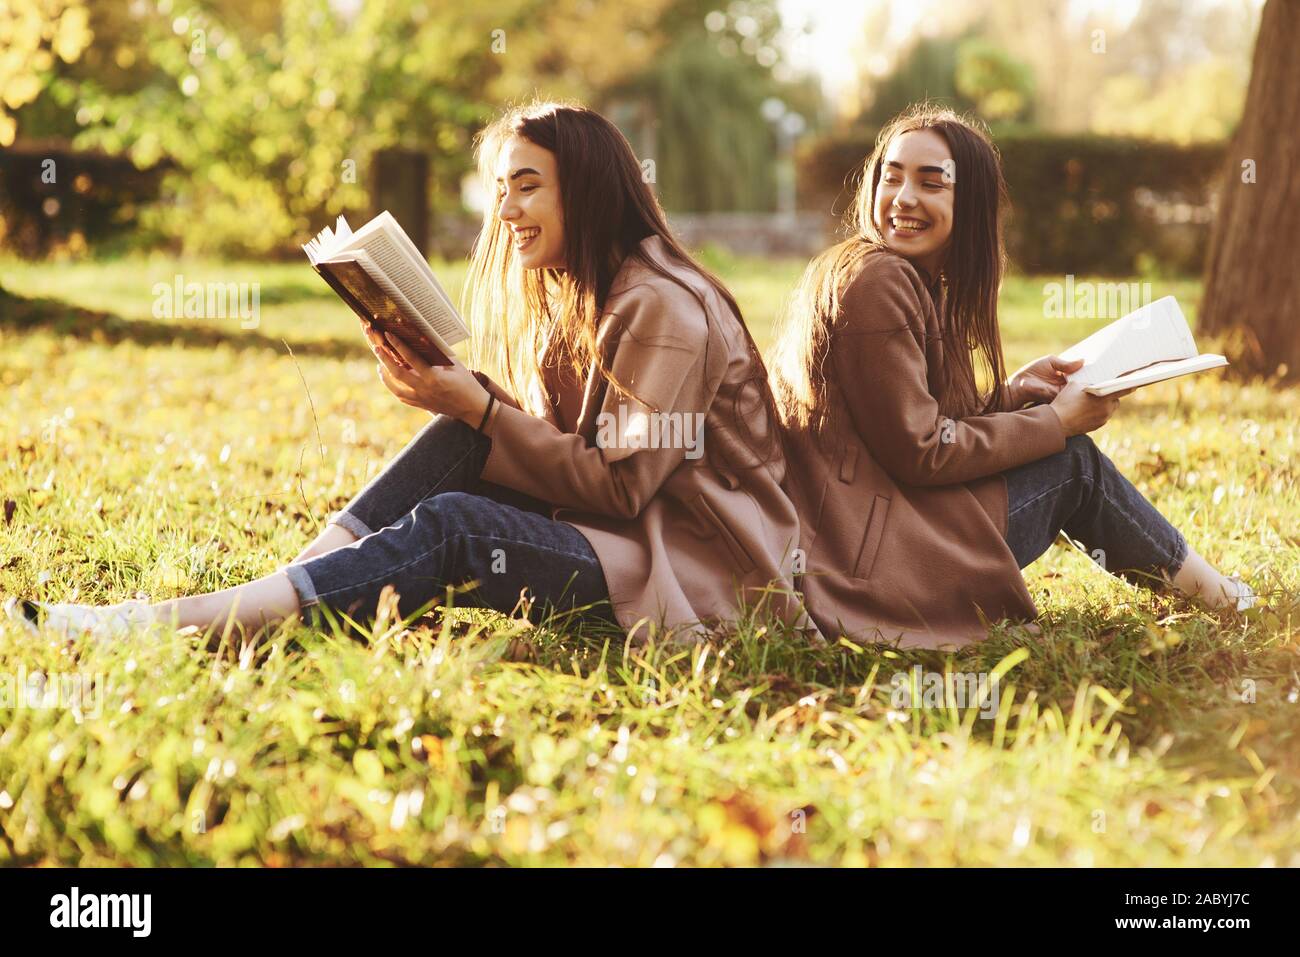 Laughinh brunette twin girls sitting back to back on the grass and having fun with legs slightly bent in knees, with brown books in hands, wearing Stock Photo